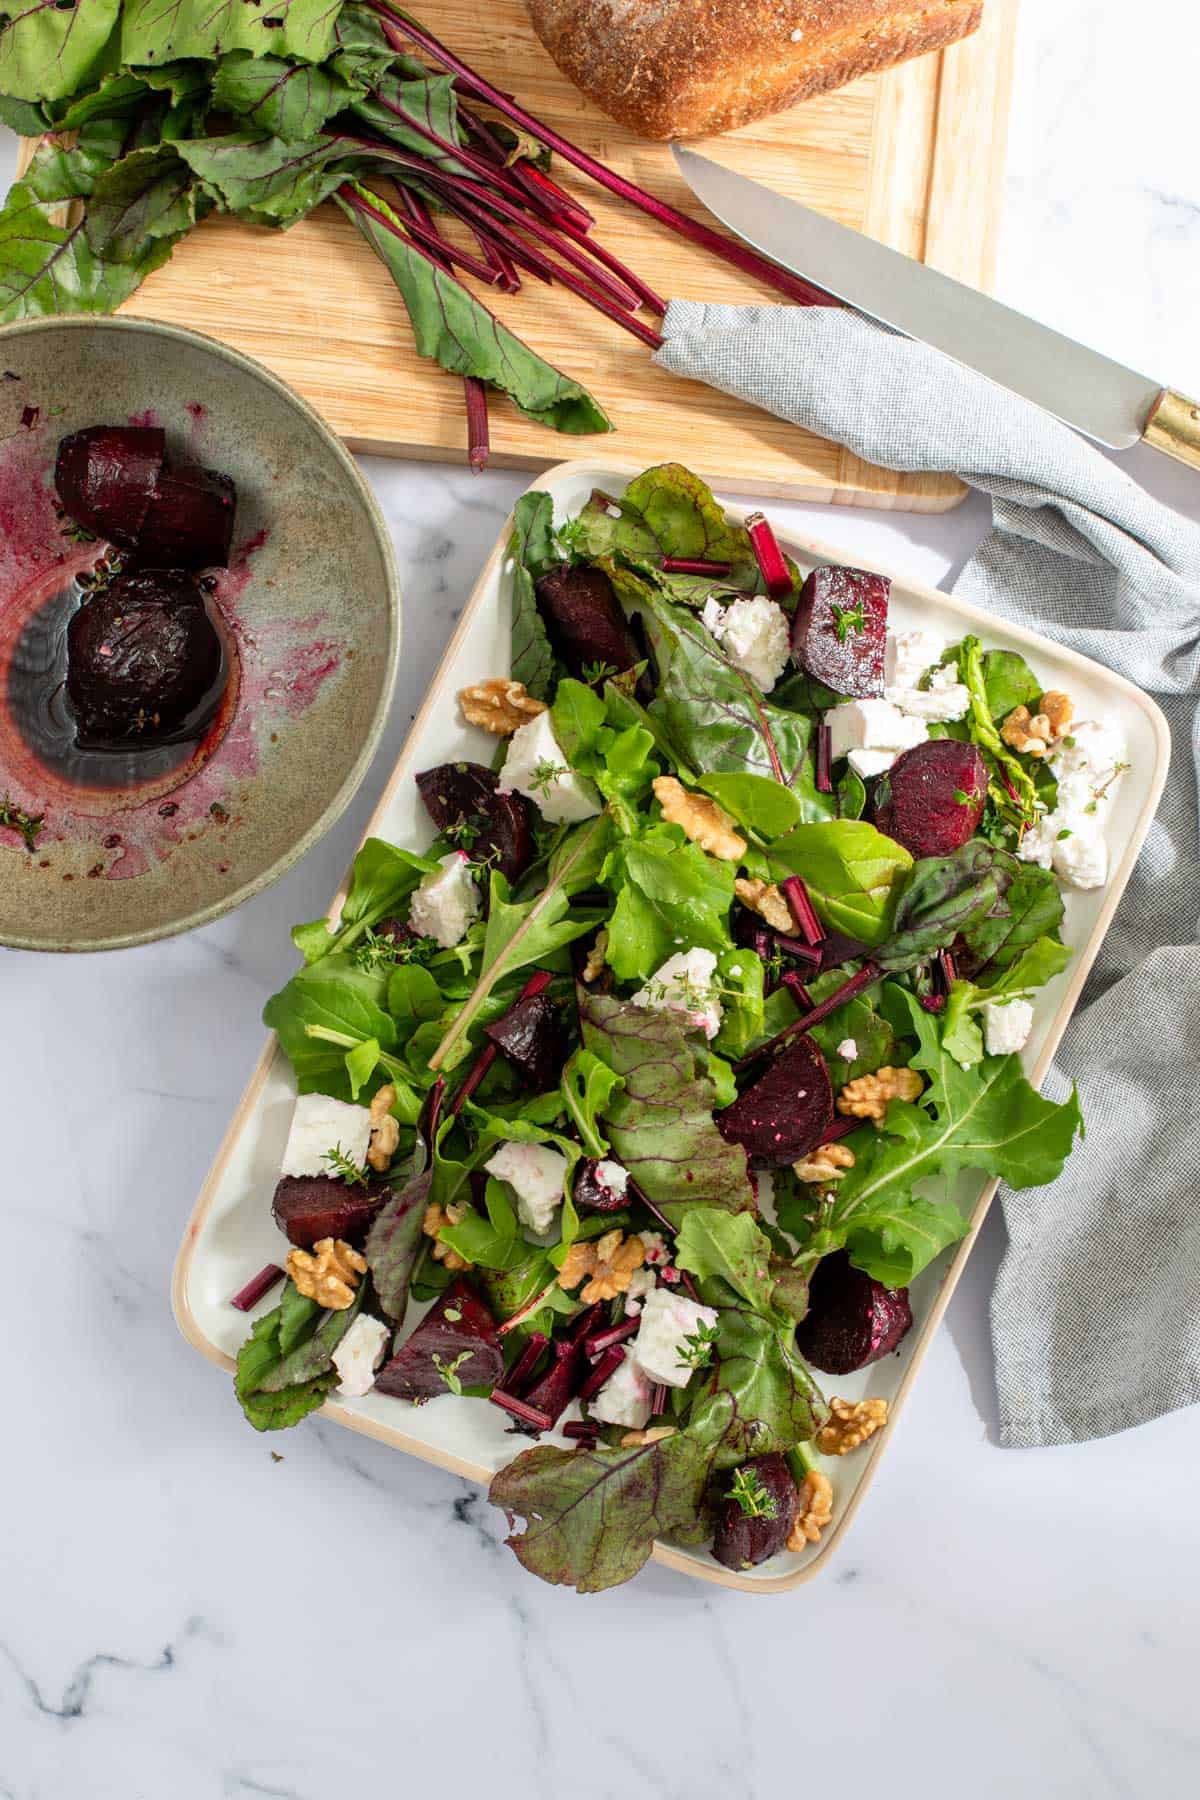 Fresh beetroot salad with mixed greens, nuts, and cheese, served on a rectangular platter, with ingredients nearby on a marble countertop.